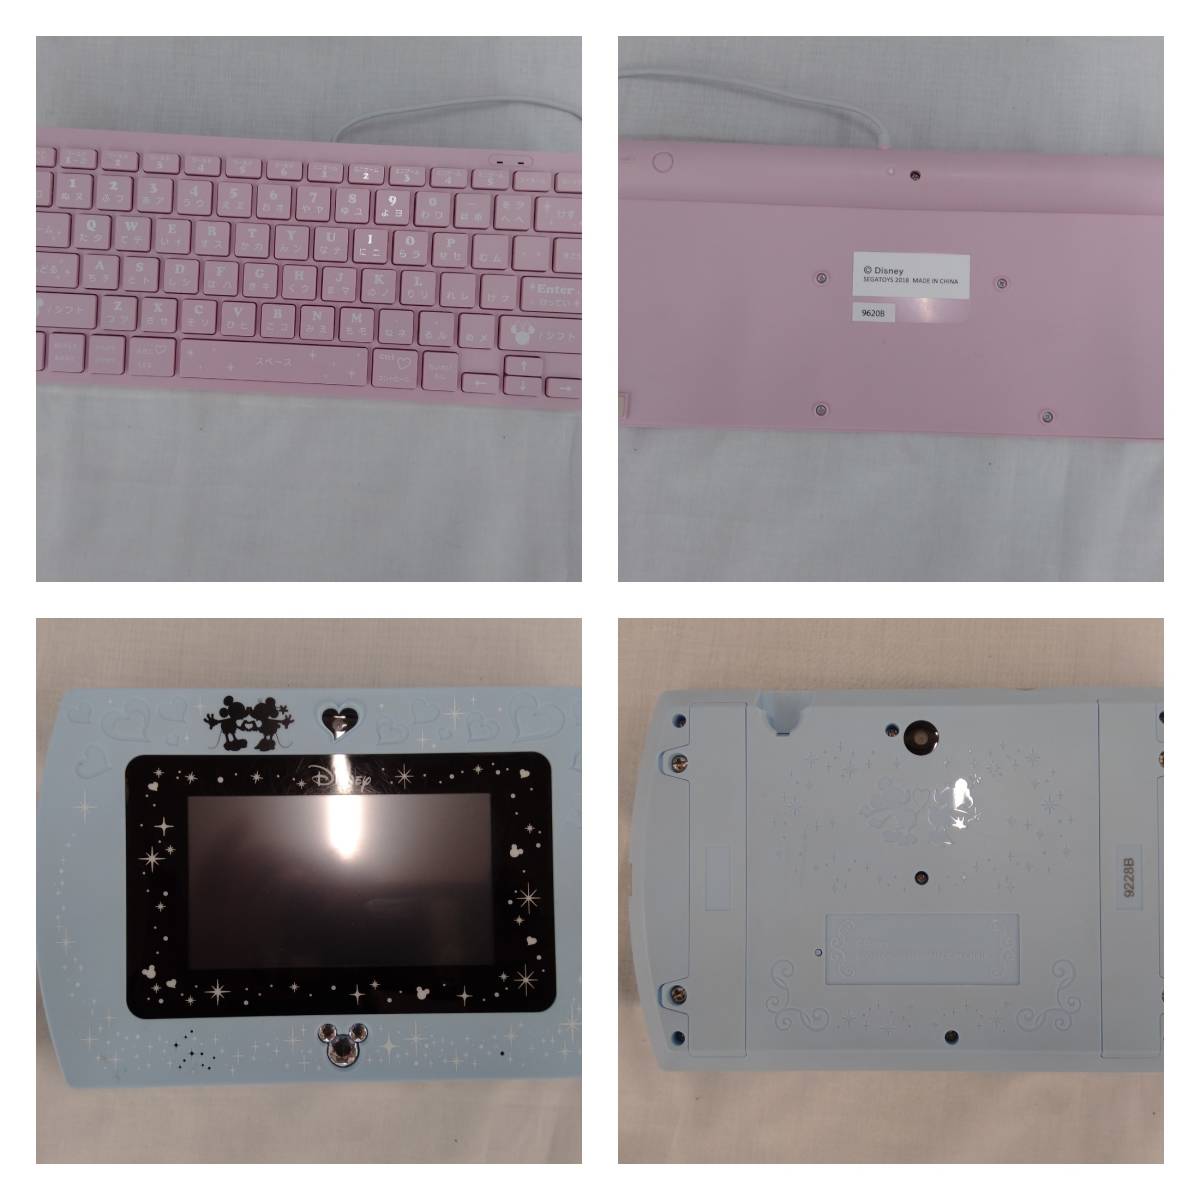  body. color . blue. Disney & Disney /piksa- character z magical *mi- pad & exclusive use soft magical keyboard toy The .s limitation 